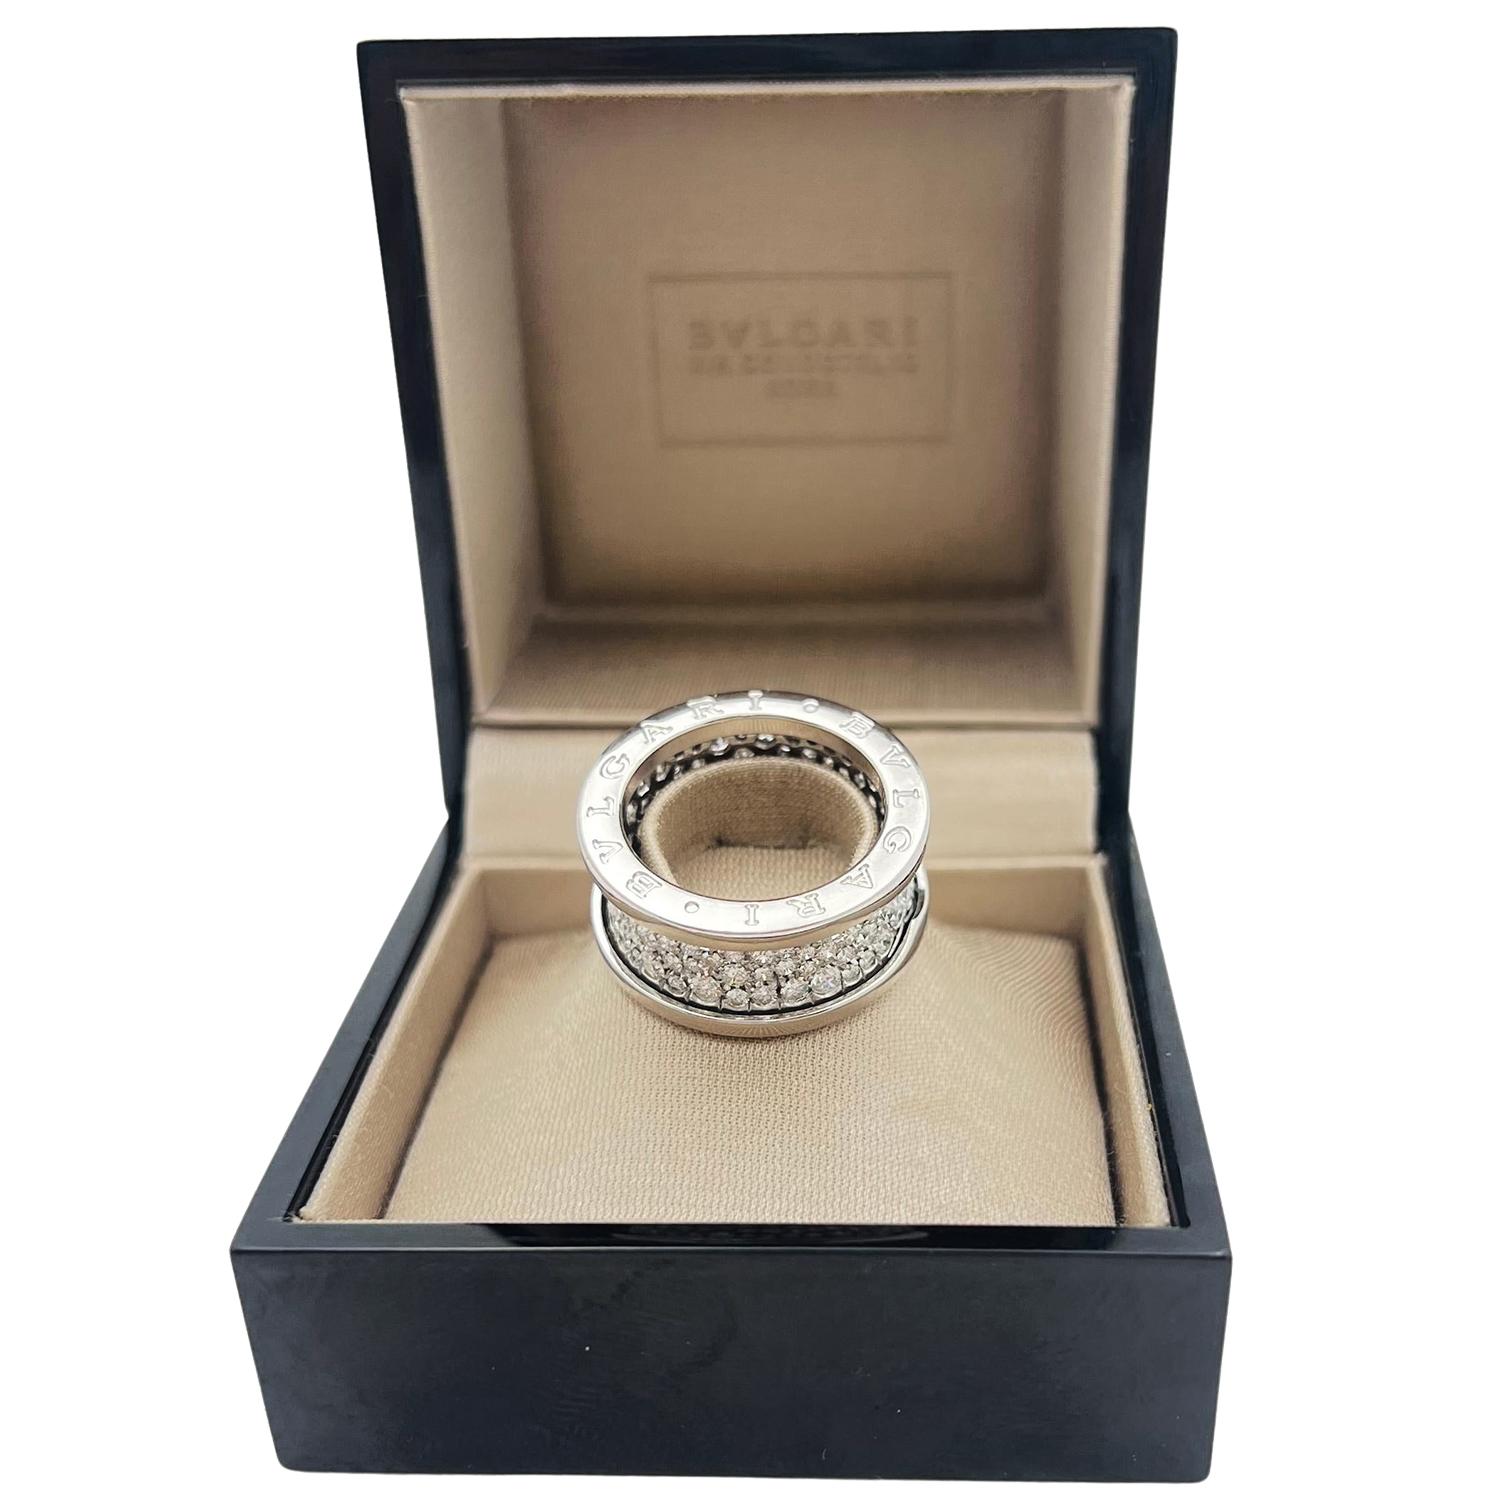 Bvlgari B.Zero 1 band ring in 18k white gold, featuring pave-set round brilliant-cut diamonds flanked by a polished 18k white gold rim with 'BVLGARI' engraved on both outside flat edges.  Diamonds weighing approximately 2.24 total carats.  Color: